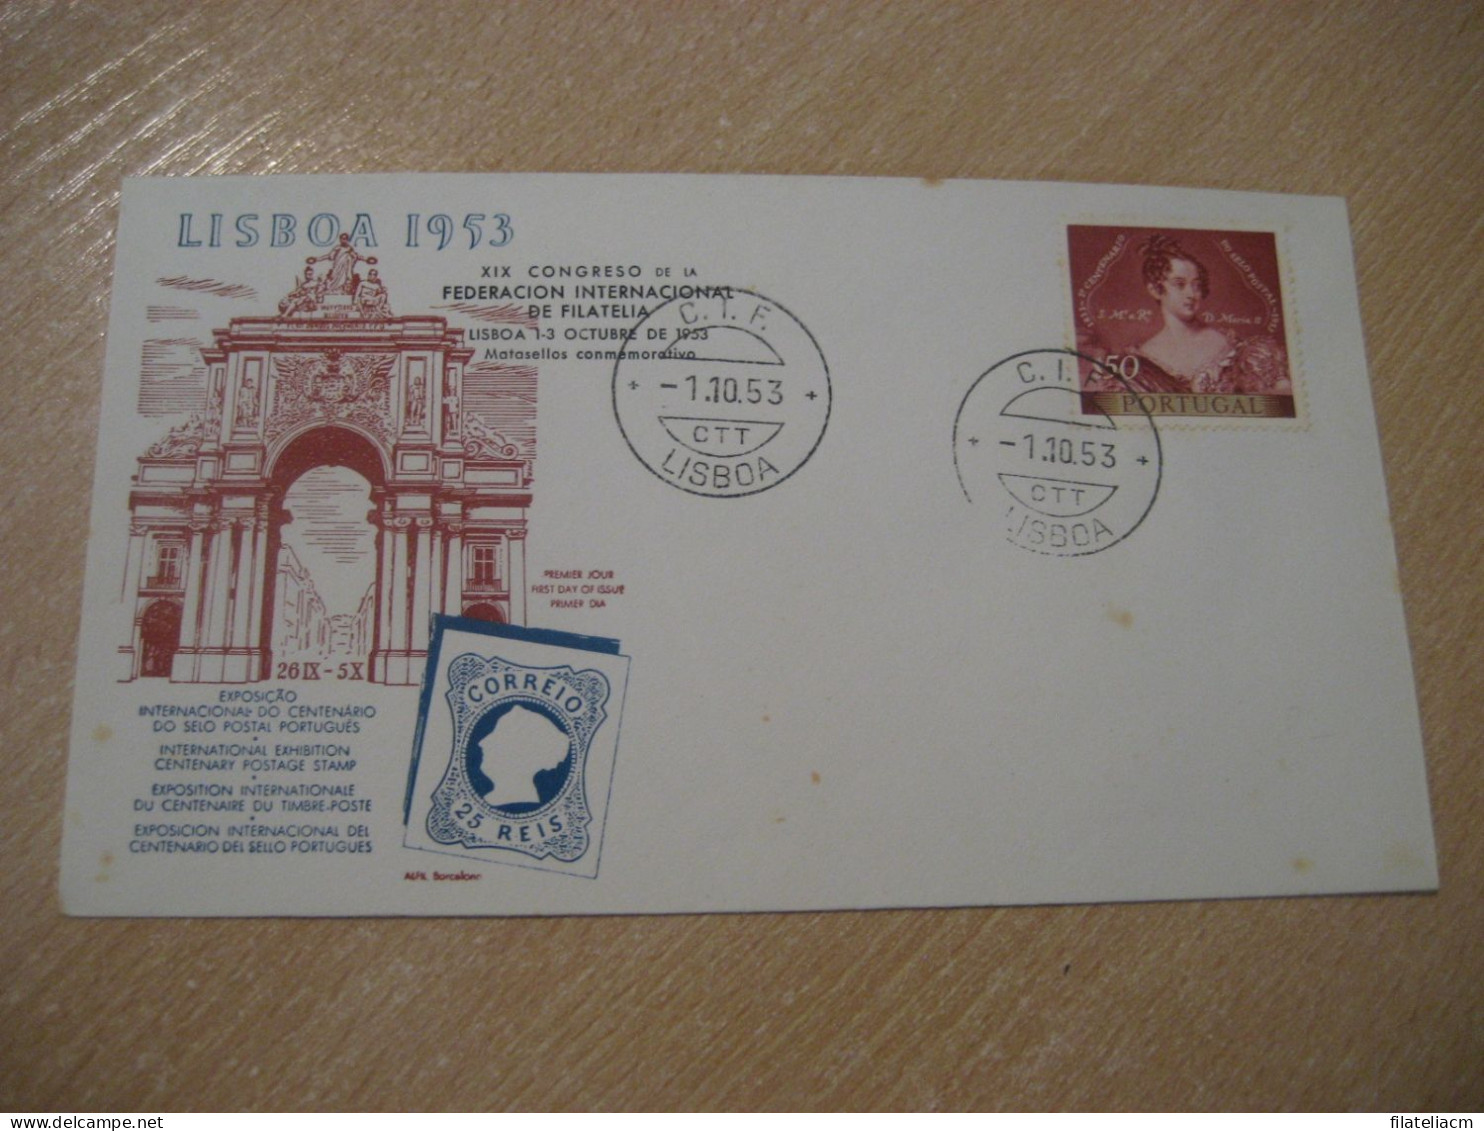 LISBOA 1953 C.I.F. CIF Expo Filatelica Int. Centenary Postage Stamp Cancel Cover PORTUGAL - Covers & Documents